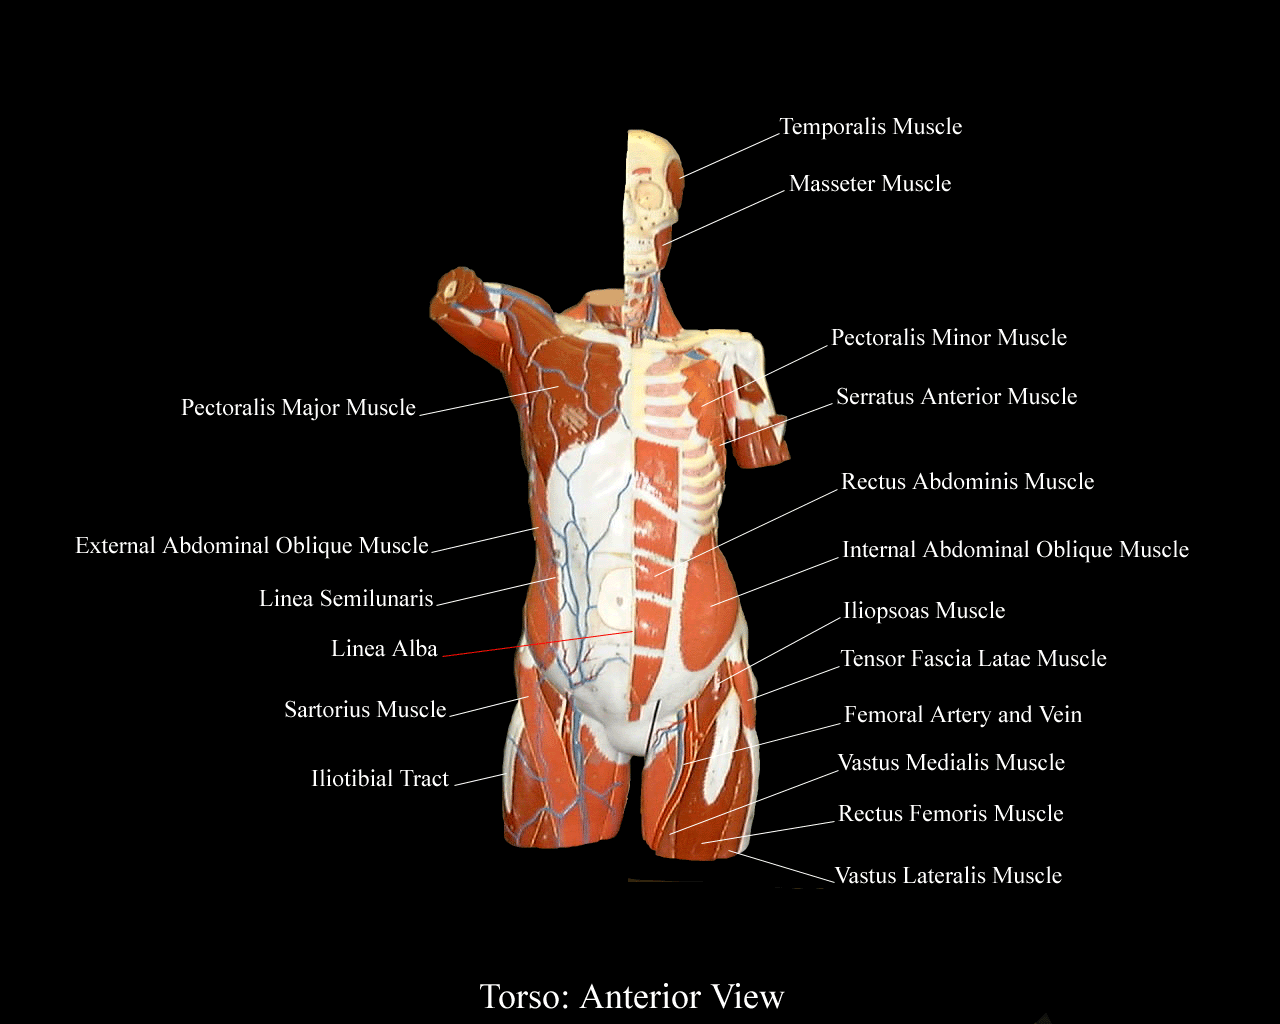 a labeled picture of the muscles on a torso model from an anterior view